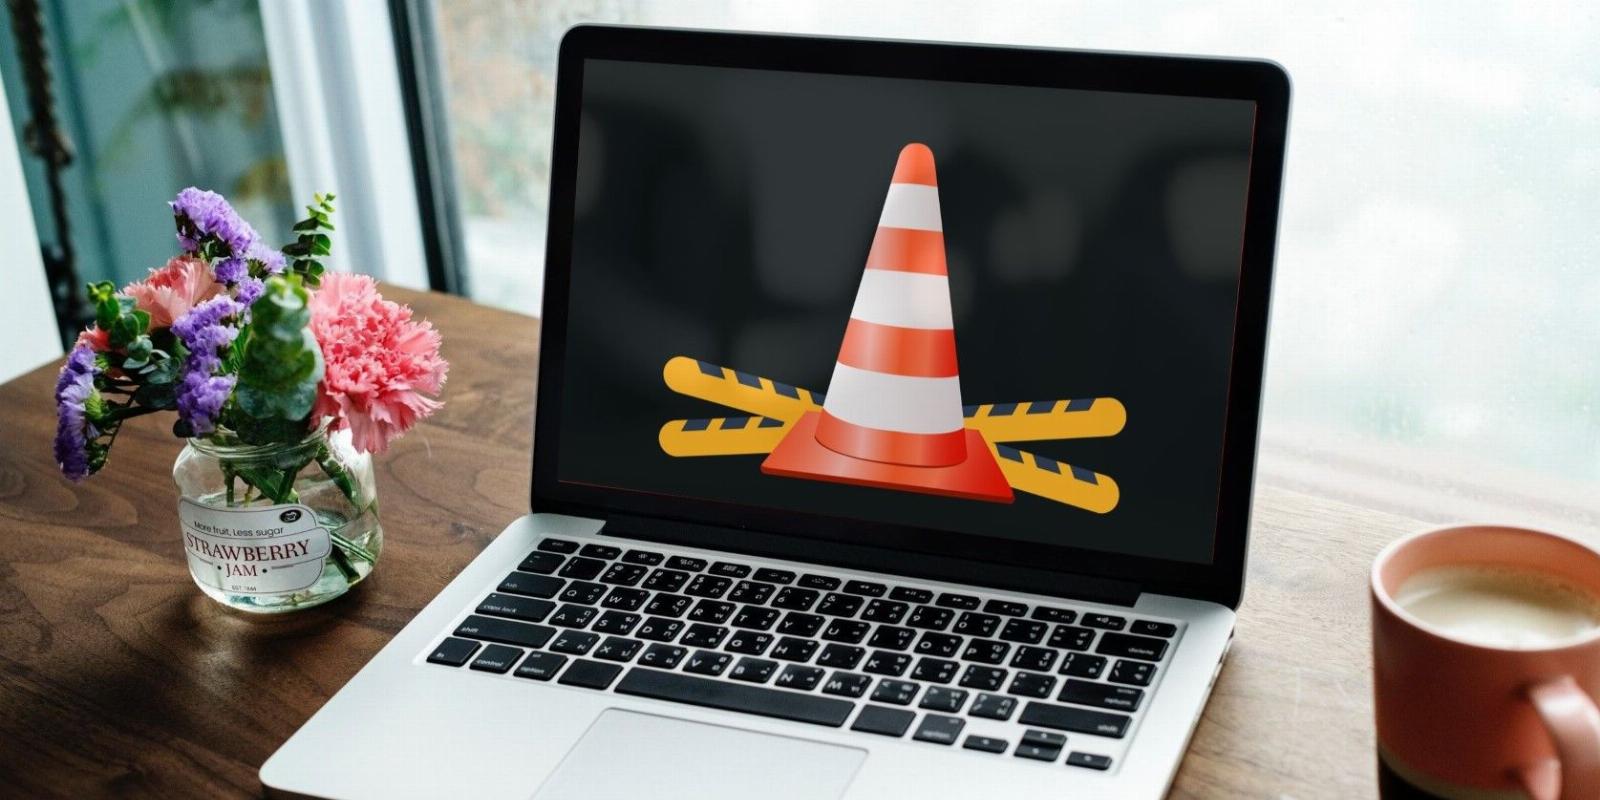 How to Fix Video Lag in VLC Media Player on Windows